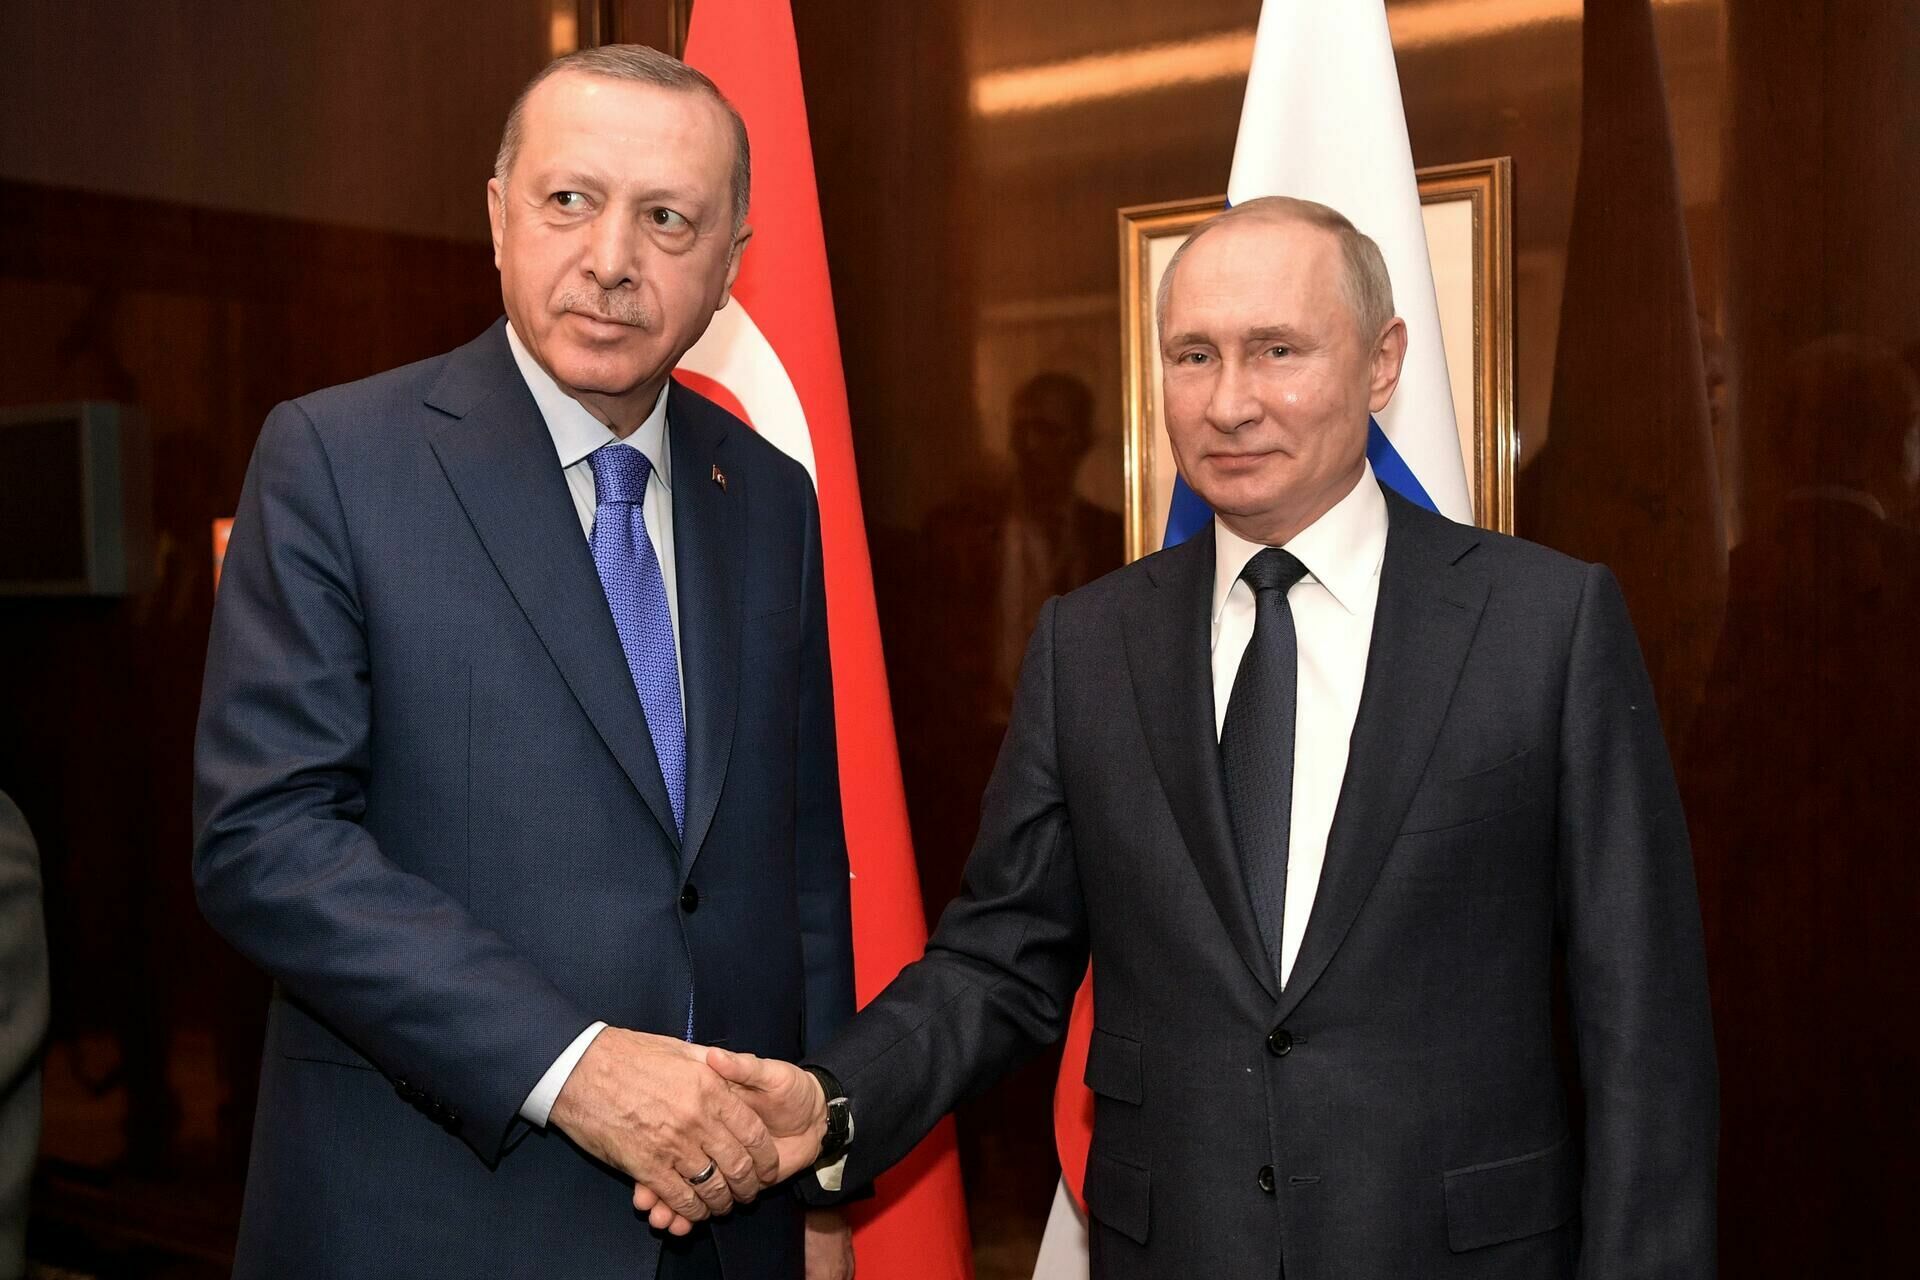 Erdogan is going to talk with Putin about referendums and nuclear weapons